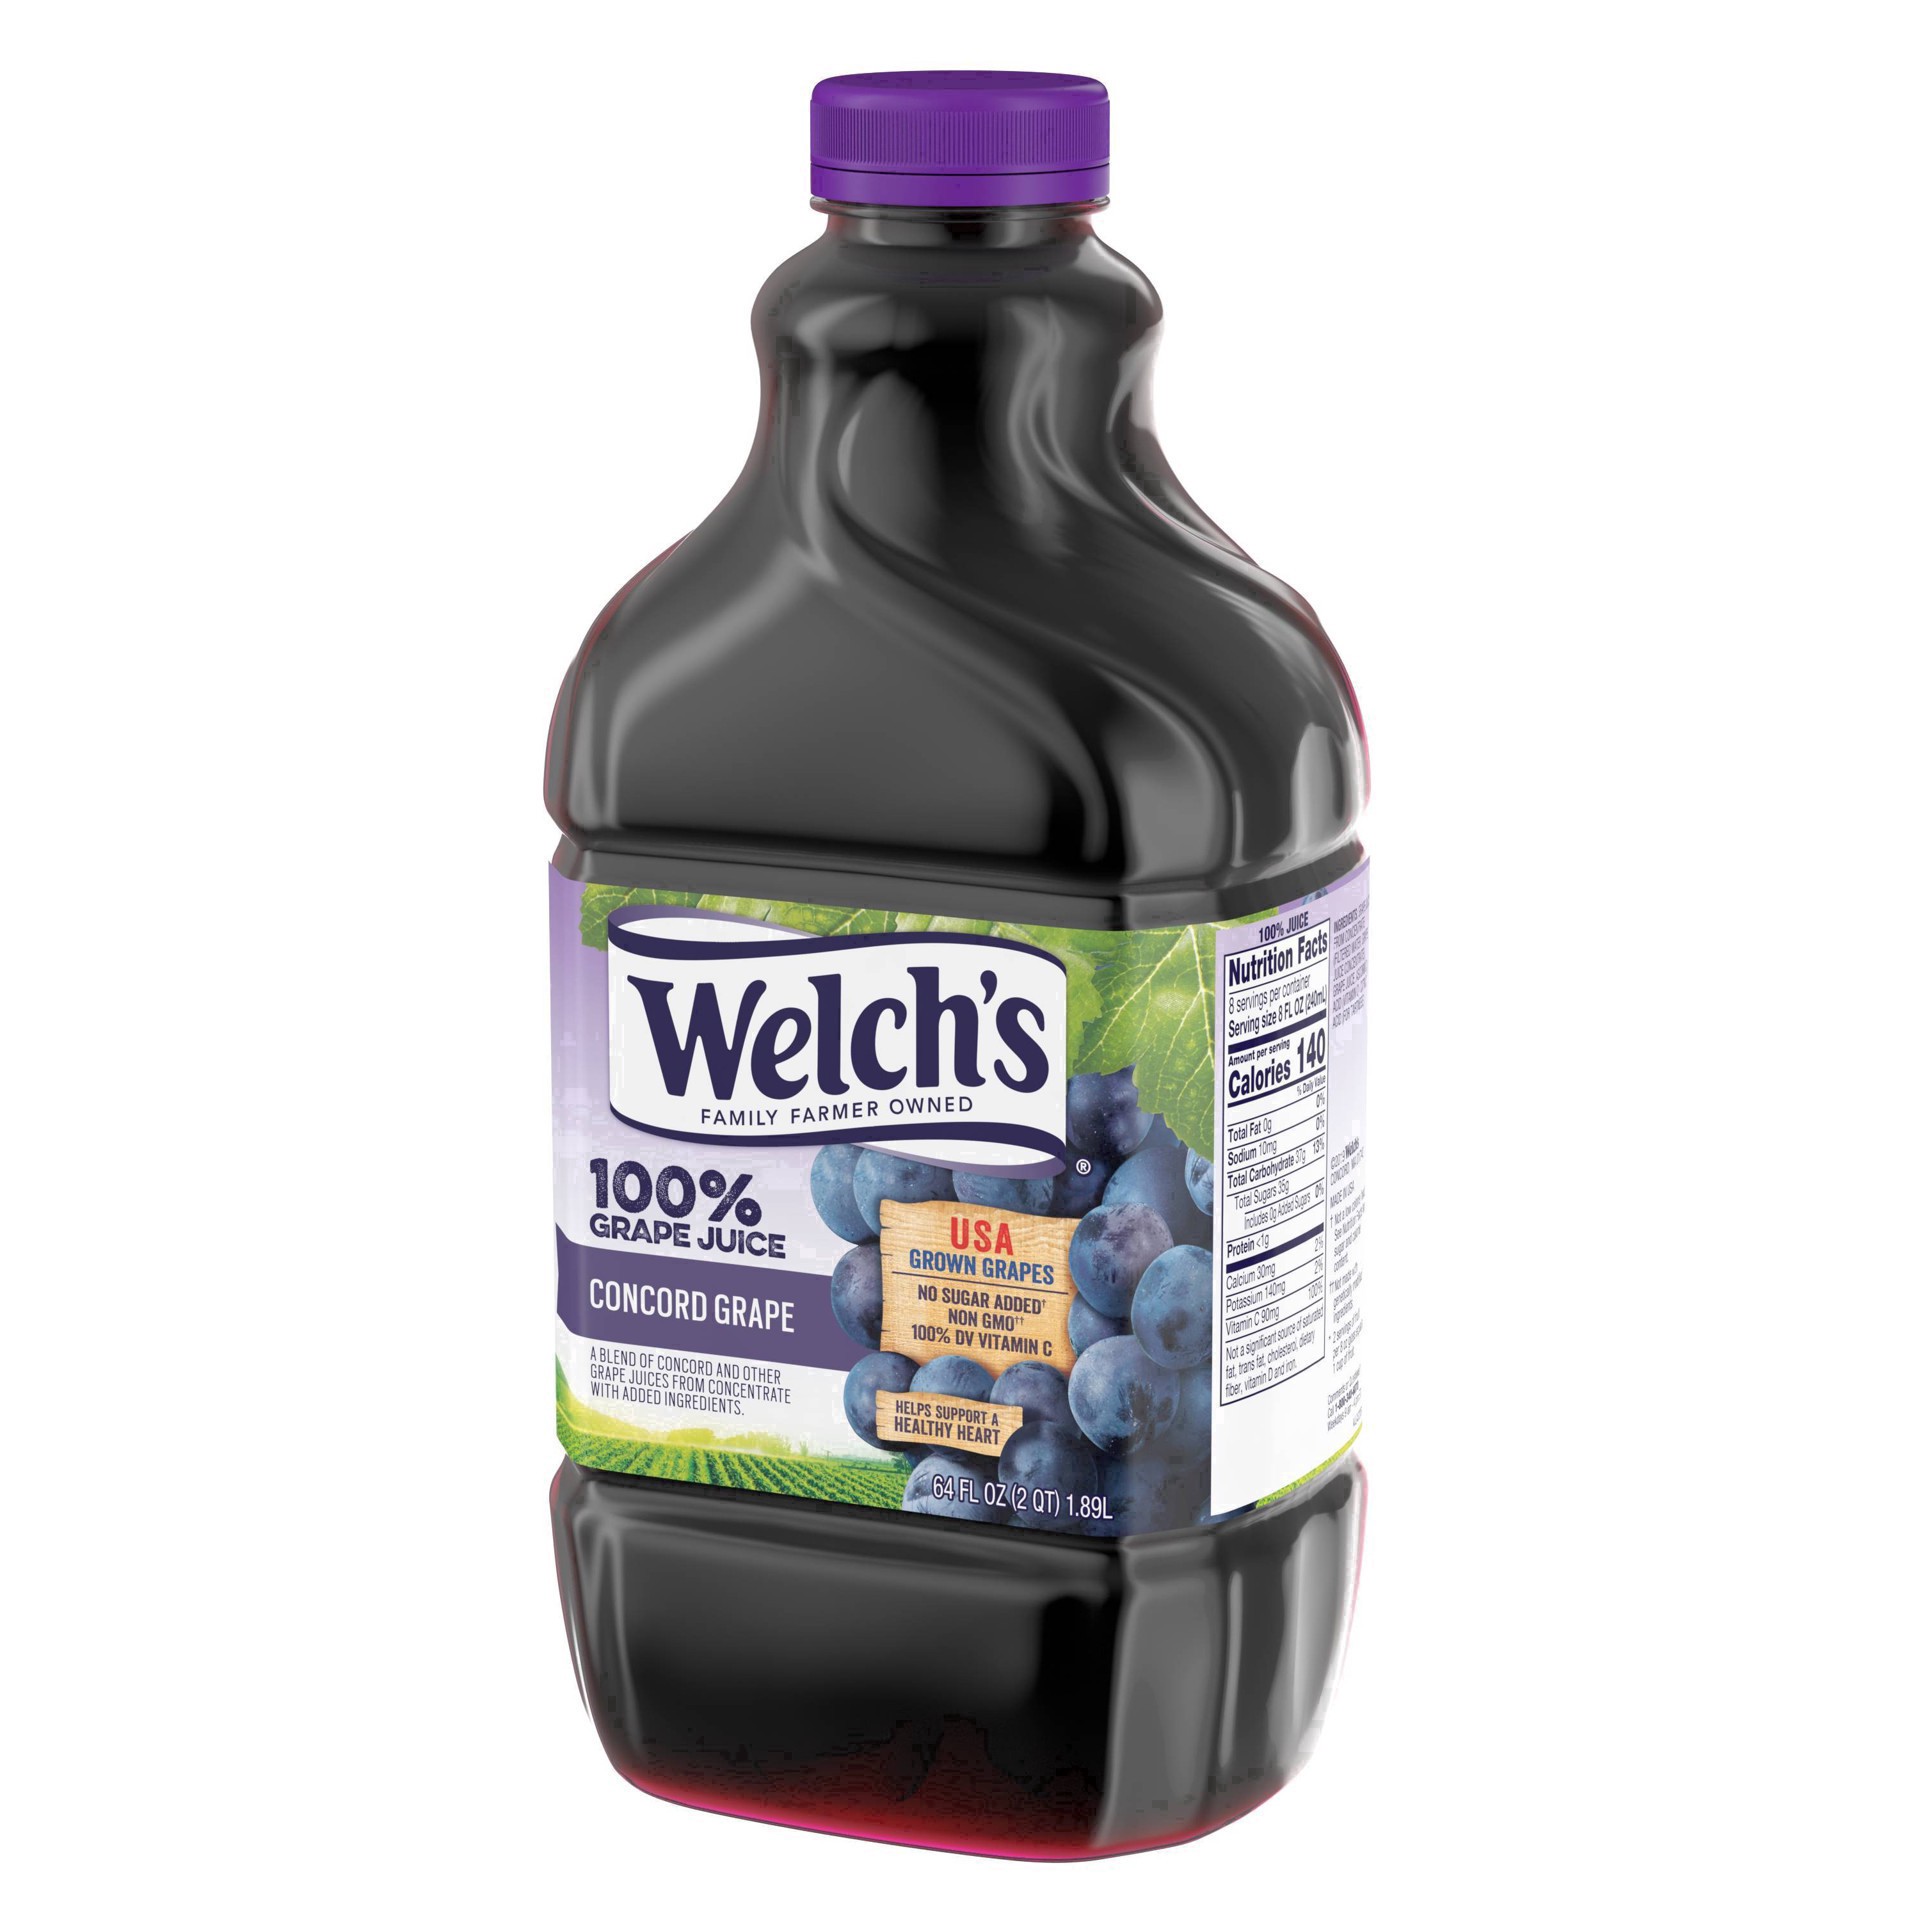 slide 39 of 70, Welch's 100% Concord Grape Juice, 64 oz